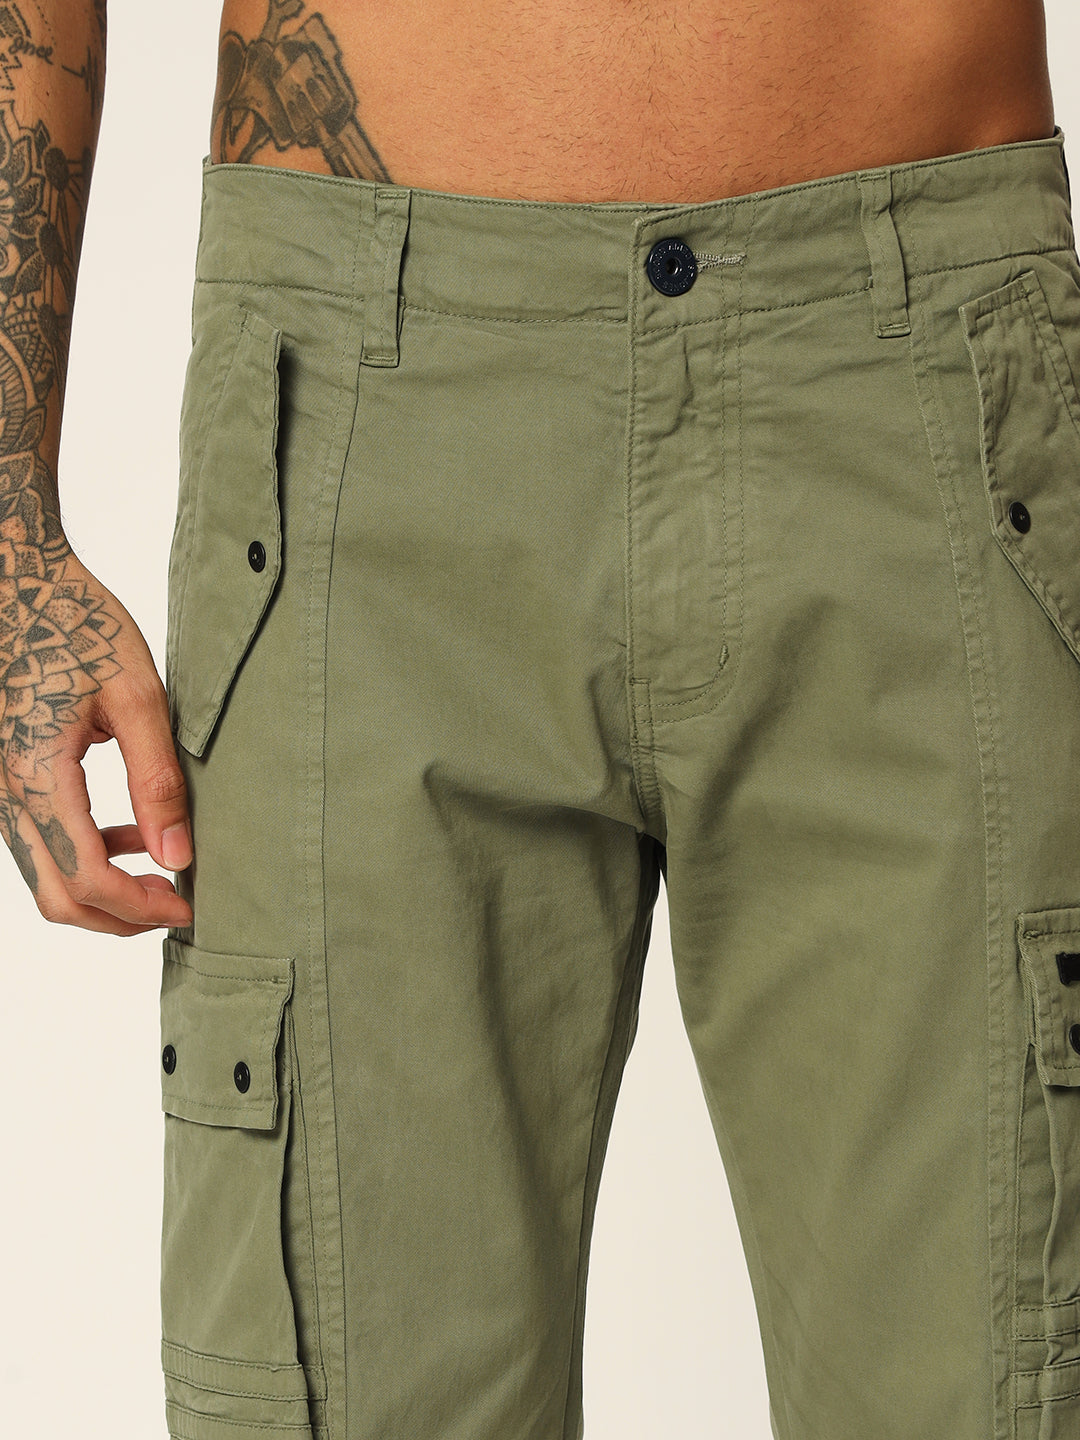 NEW RIVETS CARGO OLIVE